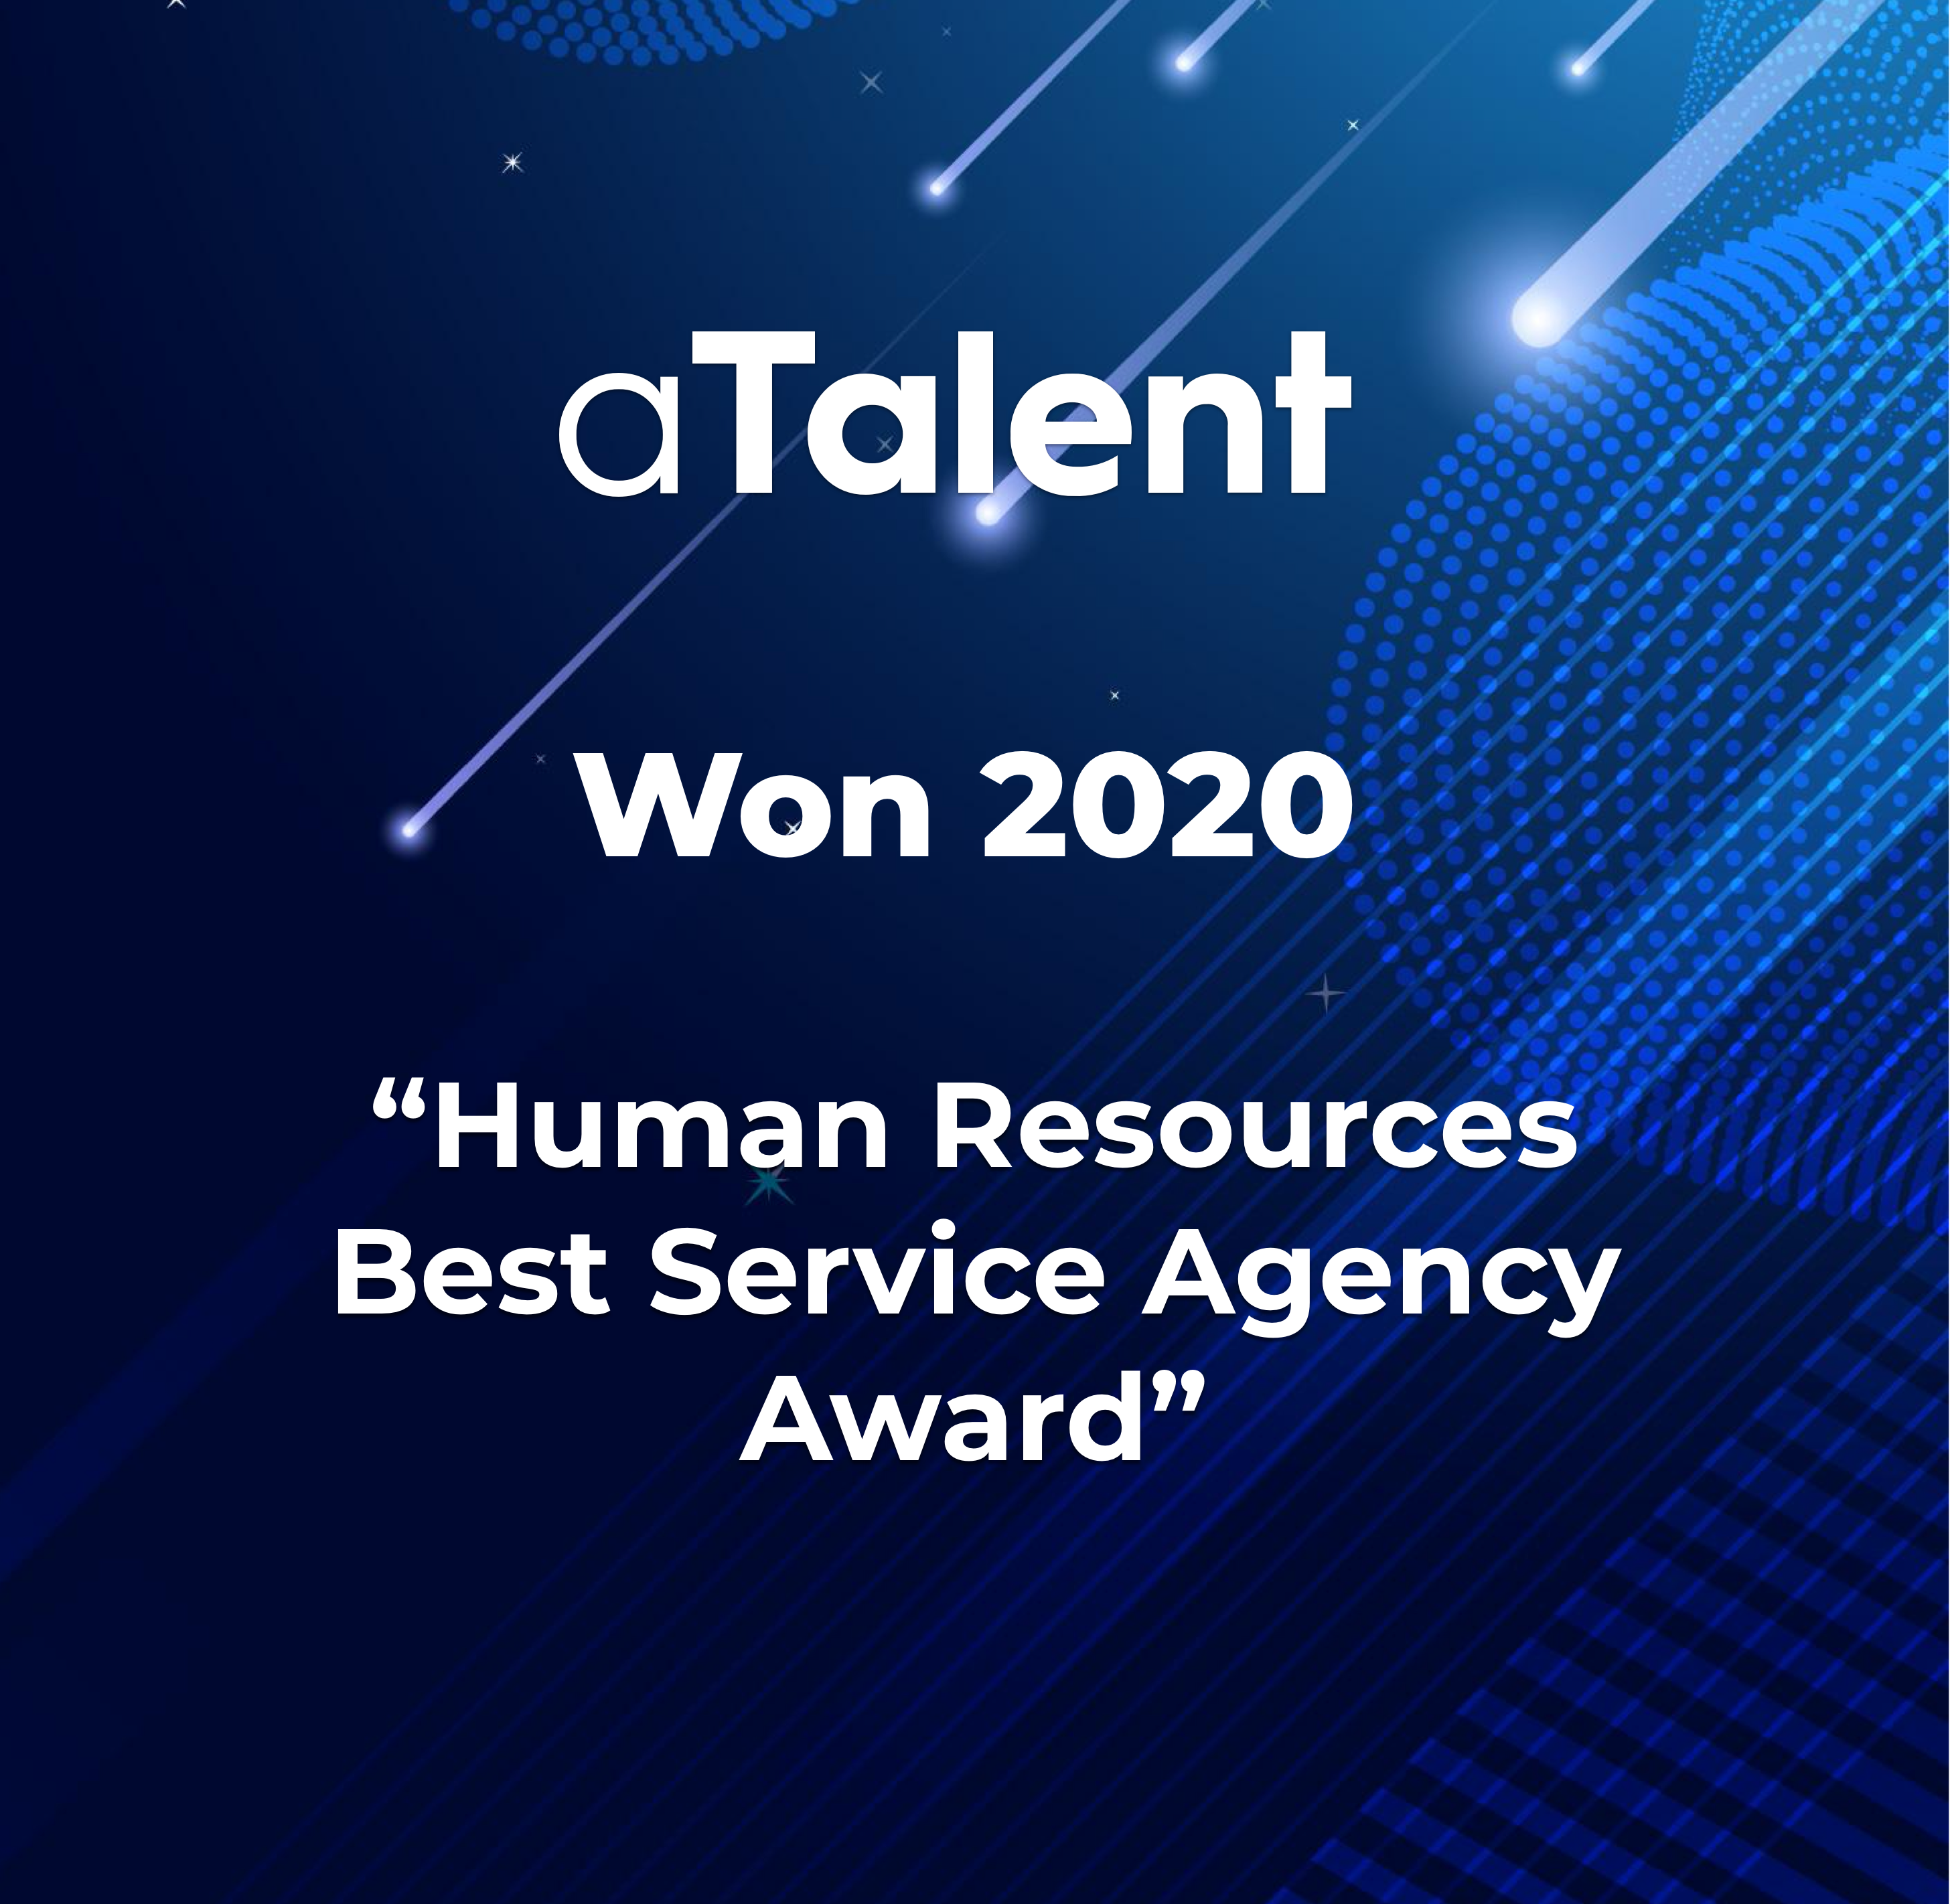 aTalent Won 2020"Human Resources Best Service Agency Award"! 1